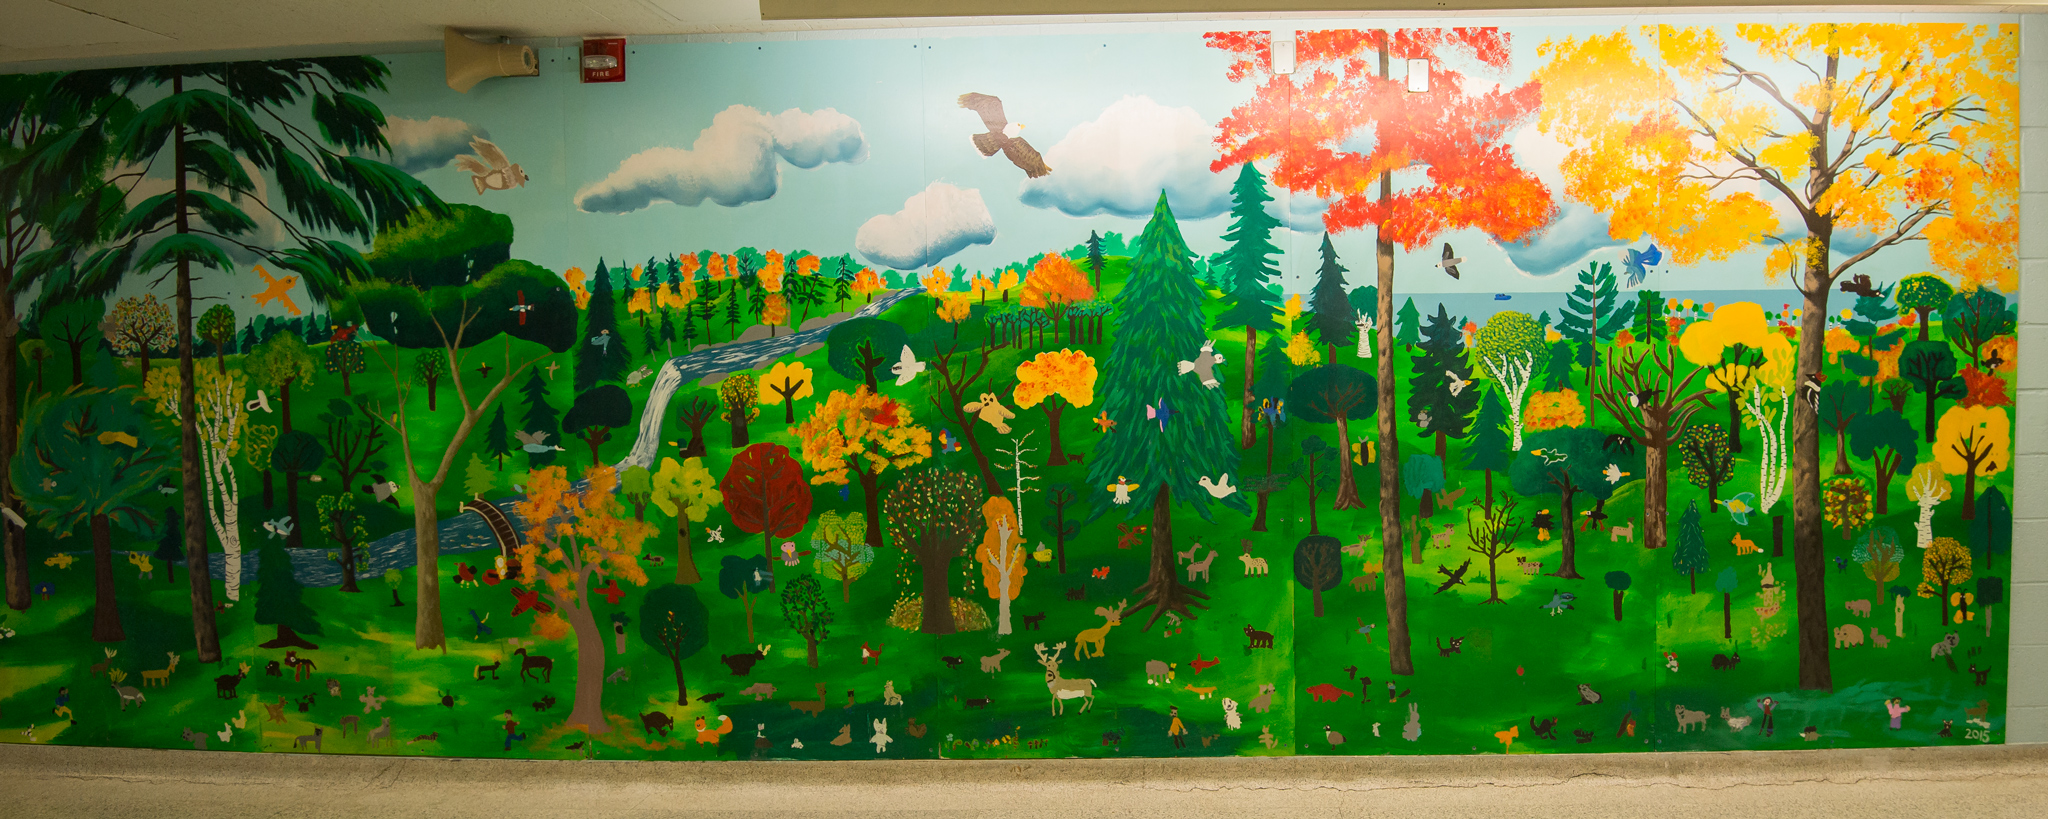 A WONDERFUL MURAL IN THE FRONT ENTRANCE OF THE SCHOOL